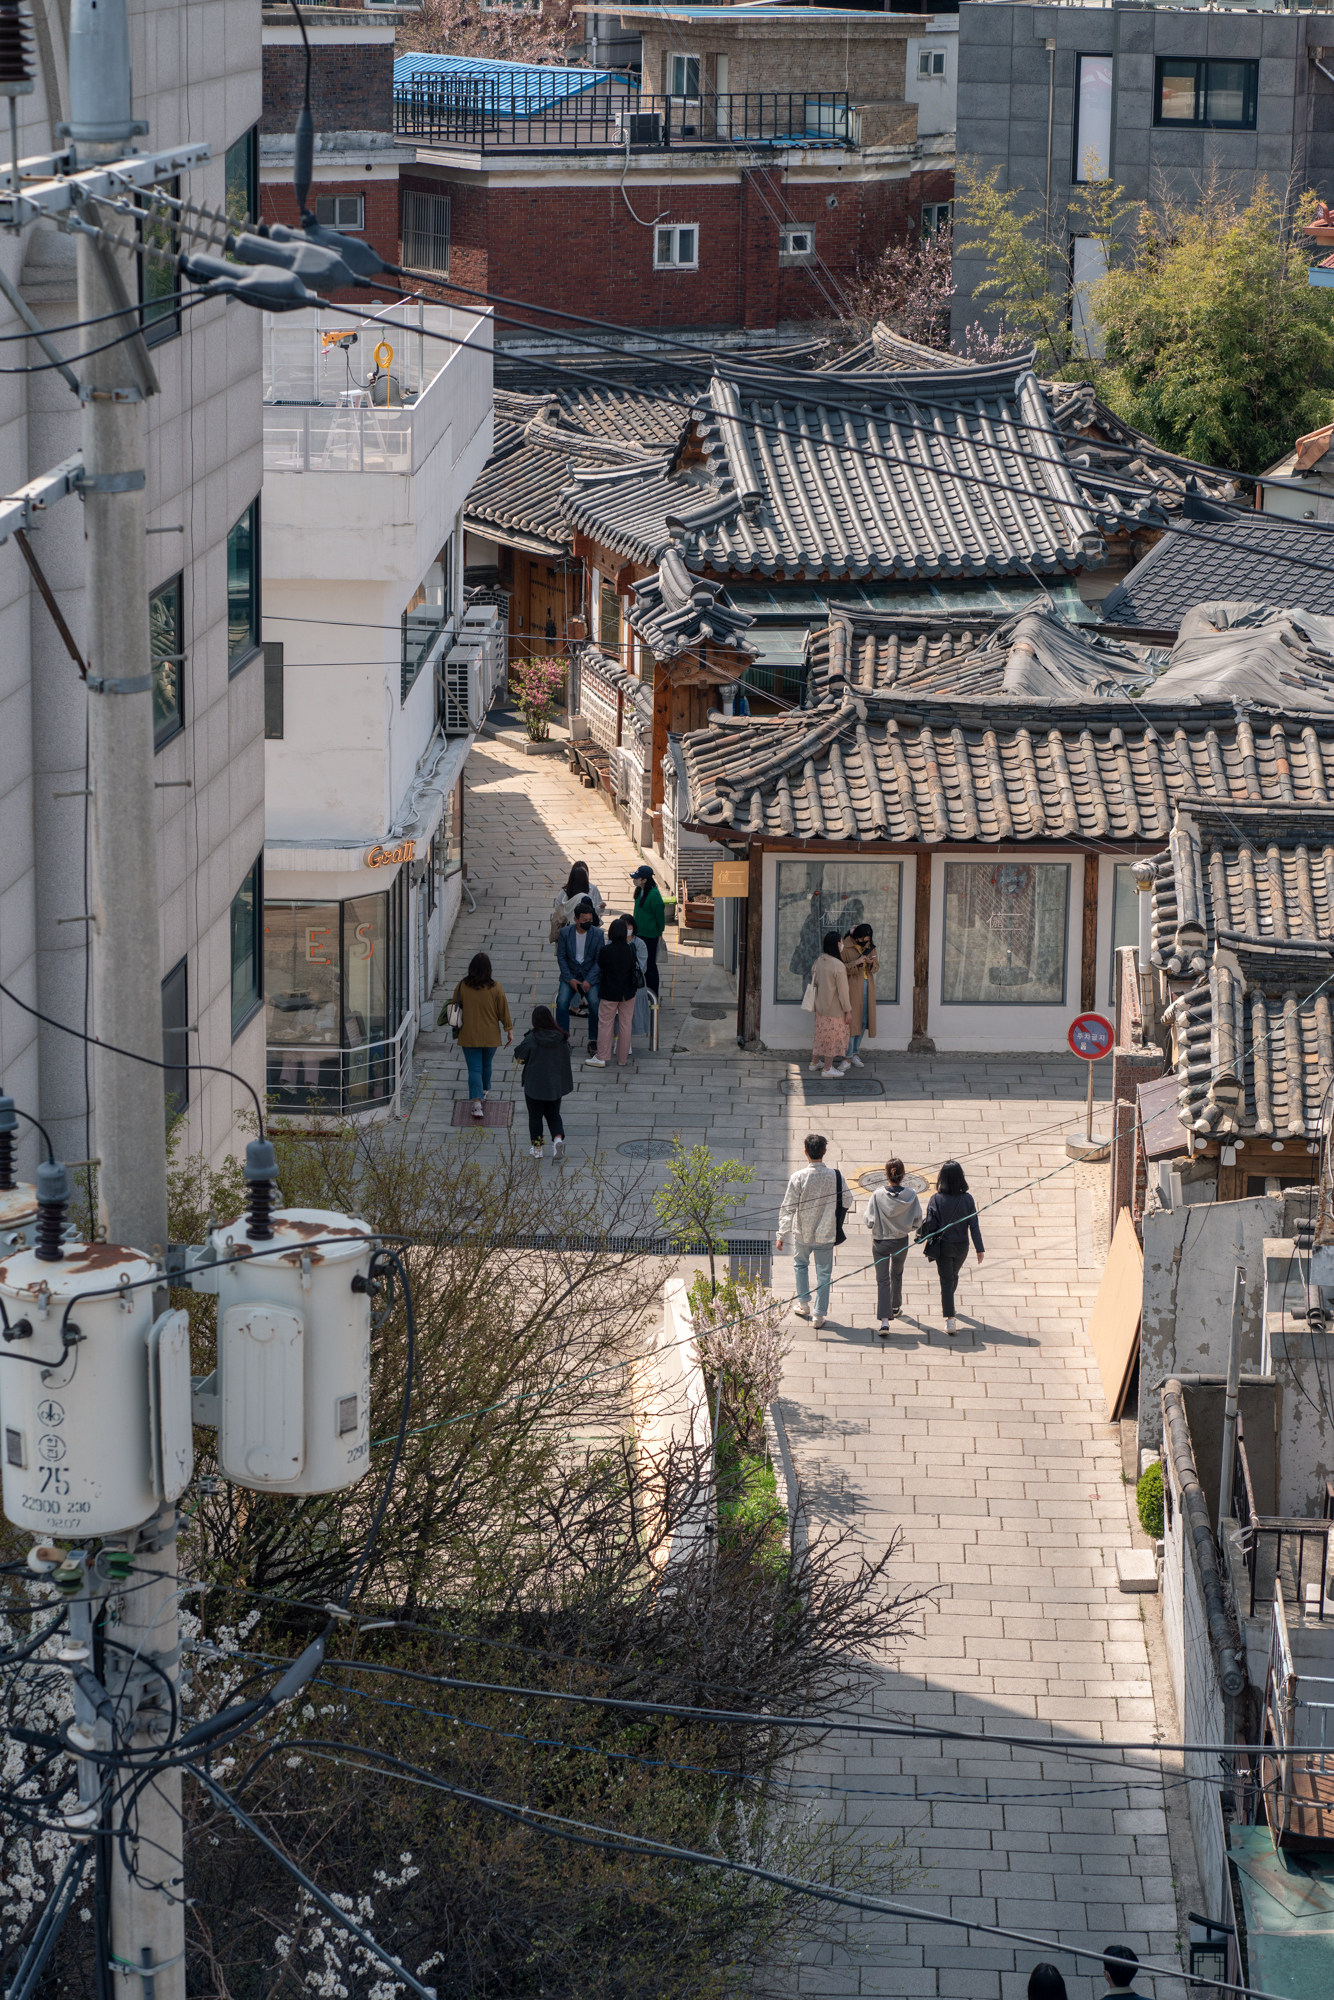 Traditional buildings in Seochon, a neighbourhood in South Korea’s capital Seoul, give the feeling of being on the set of a historical K-drama. Photo: Wansuk Kim